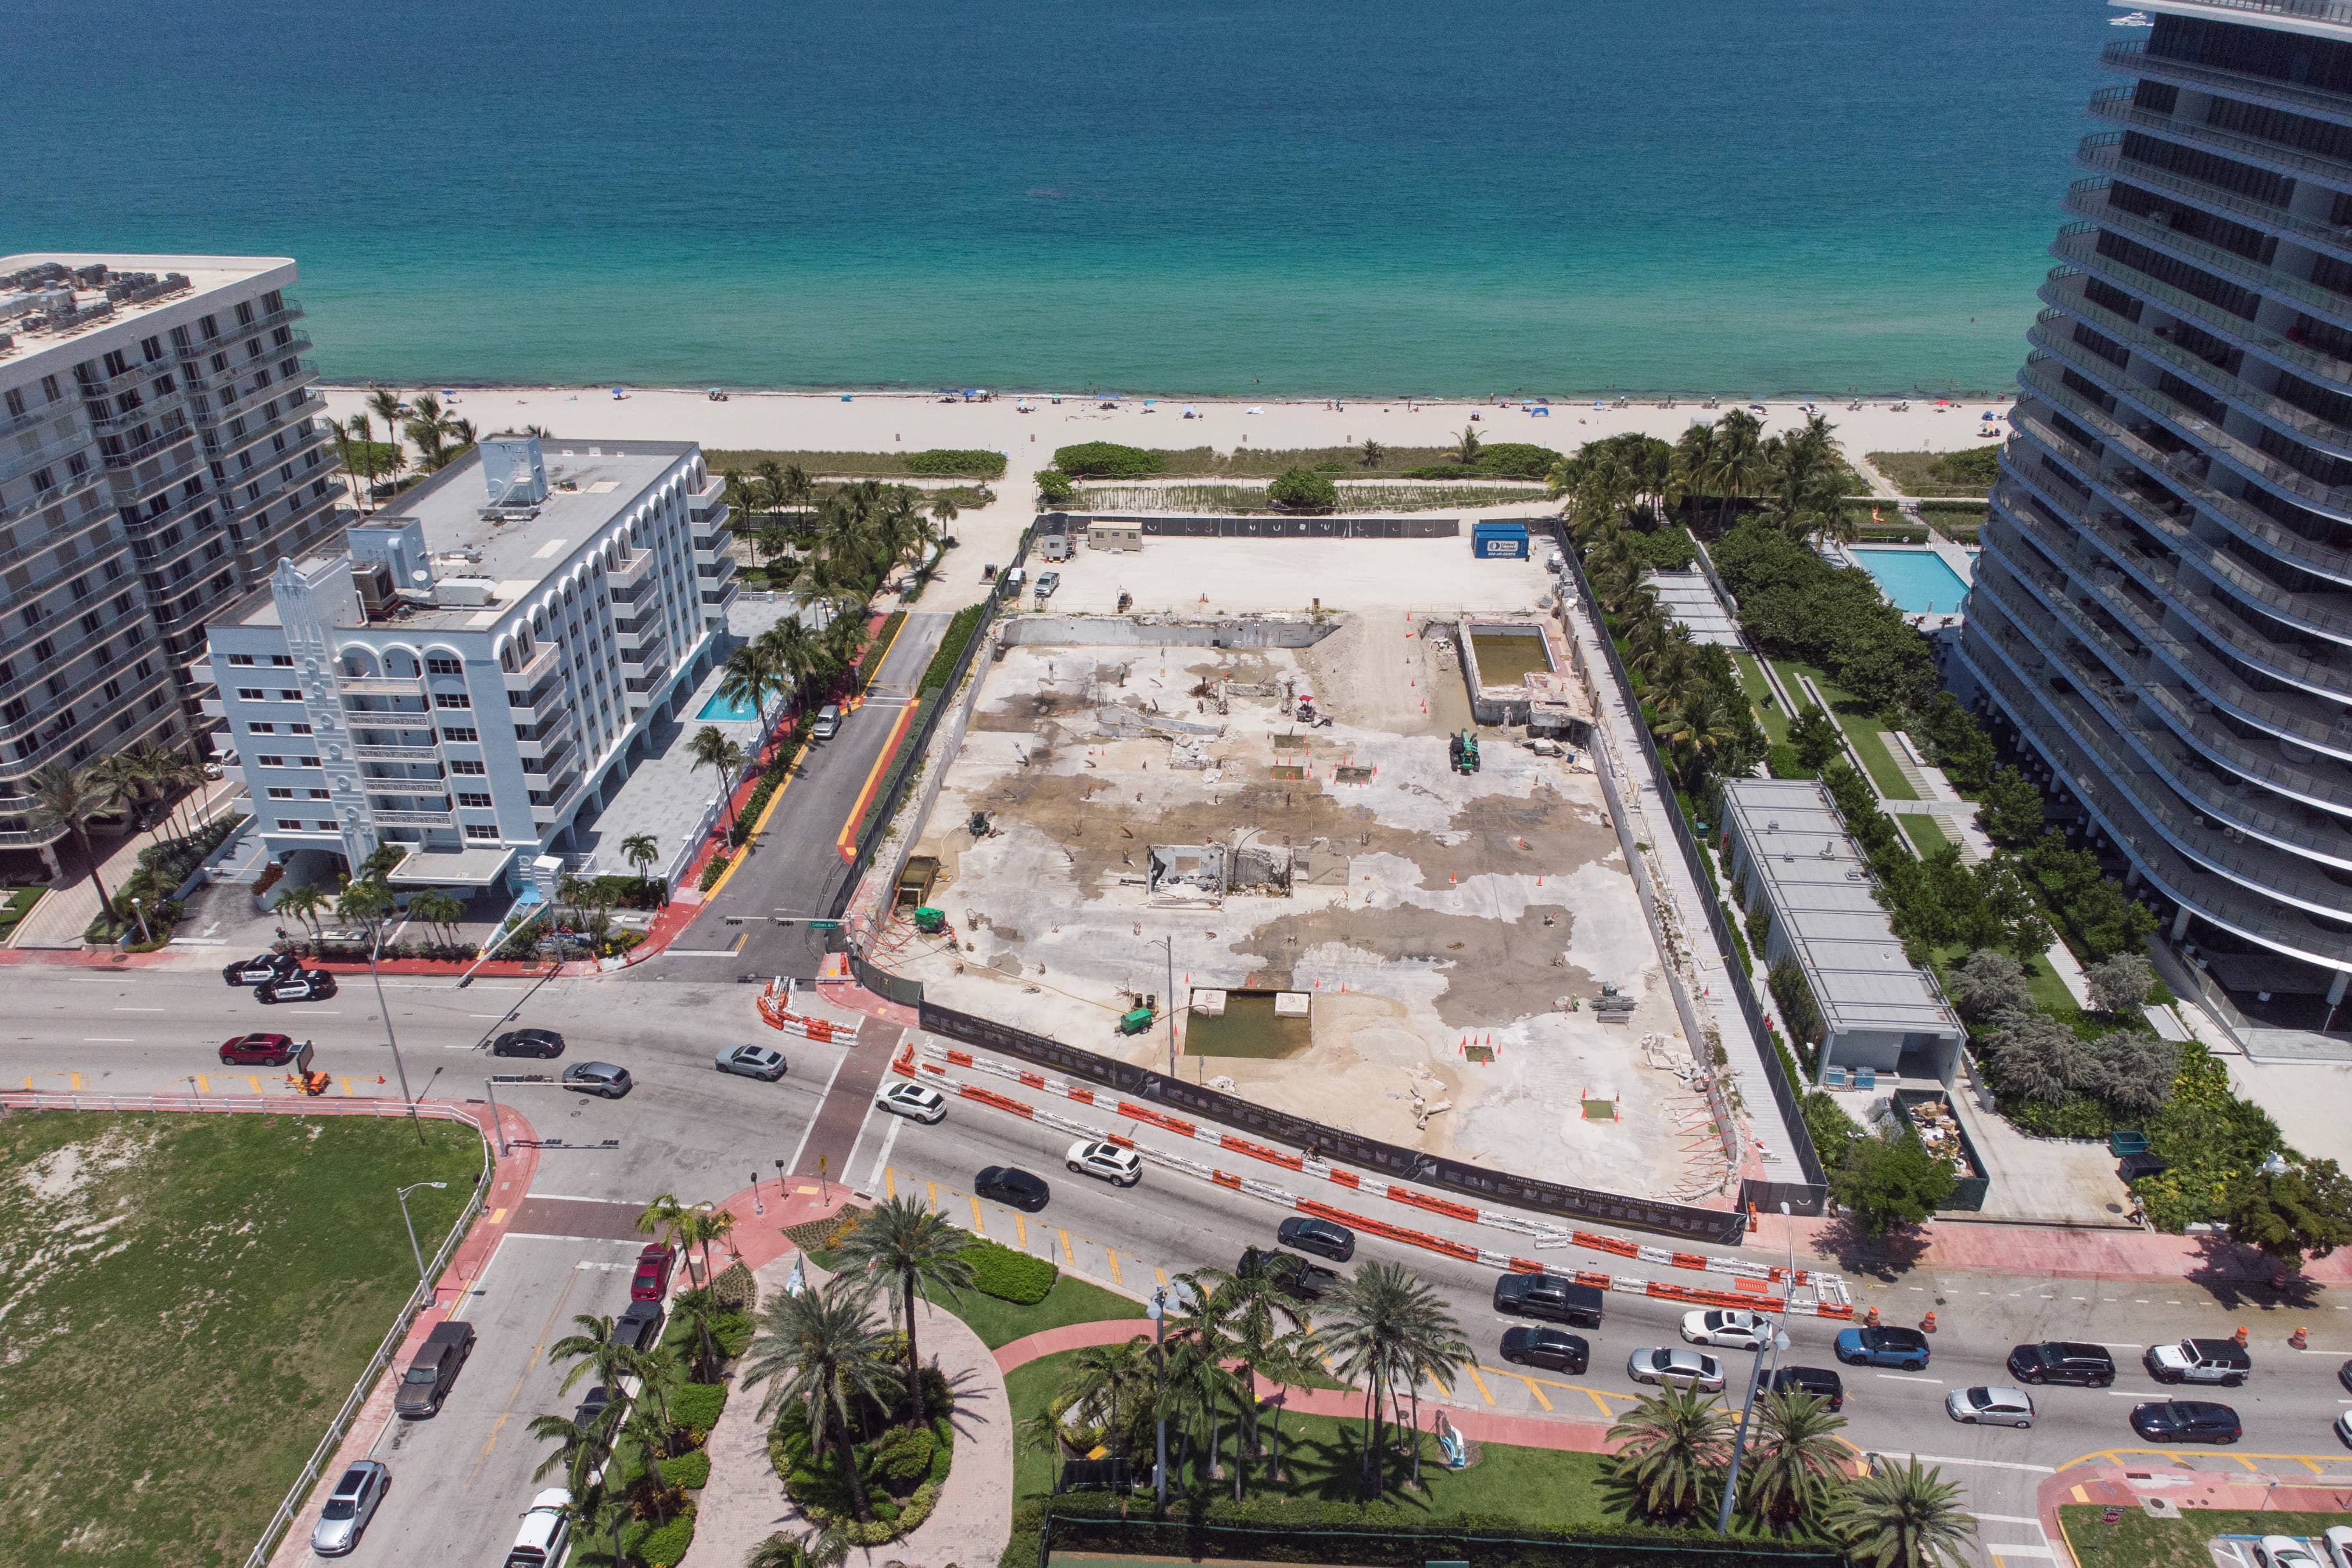 an-aerial-view-shows-the-site-of-champlain-towers-south-condominium-collapse-in-surfside